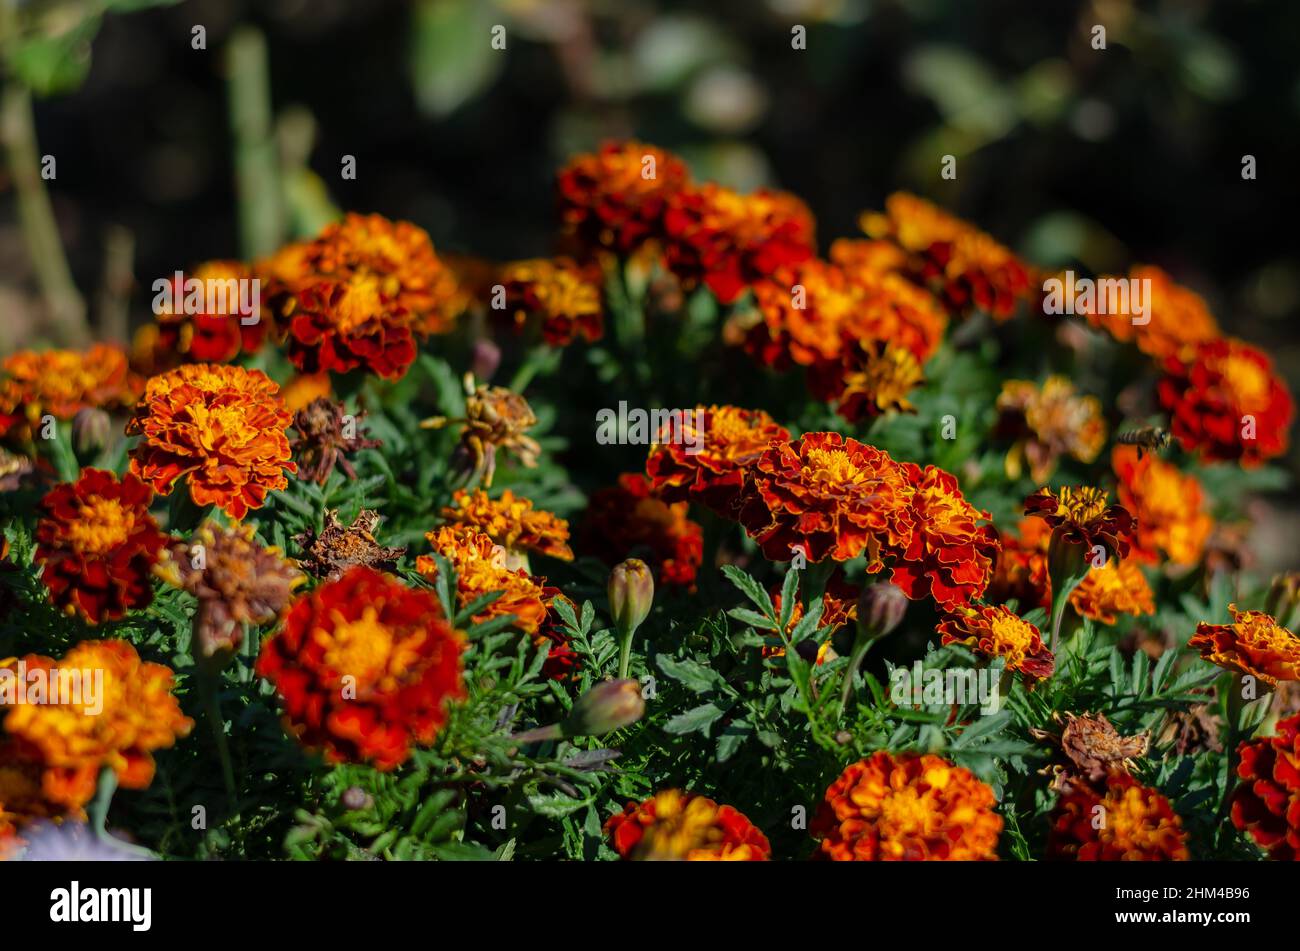 Beautiful orange flowers in a flower bed. Tagetes is a genus of annual or perennial, mostly herbaceous plants in the sunflower family Asteraceae. Sele Stock Photo